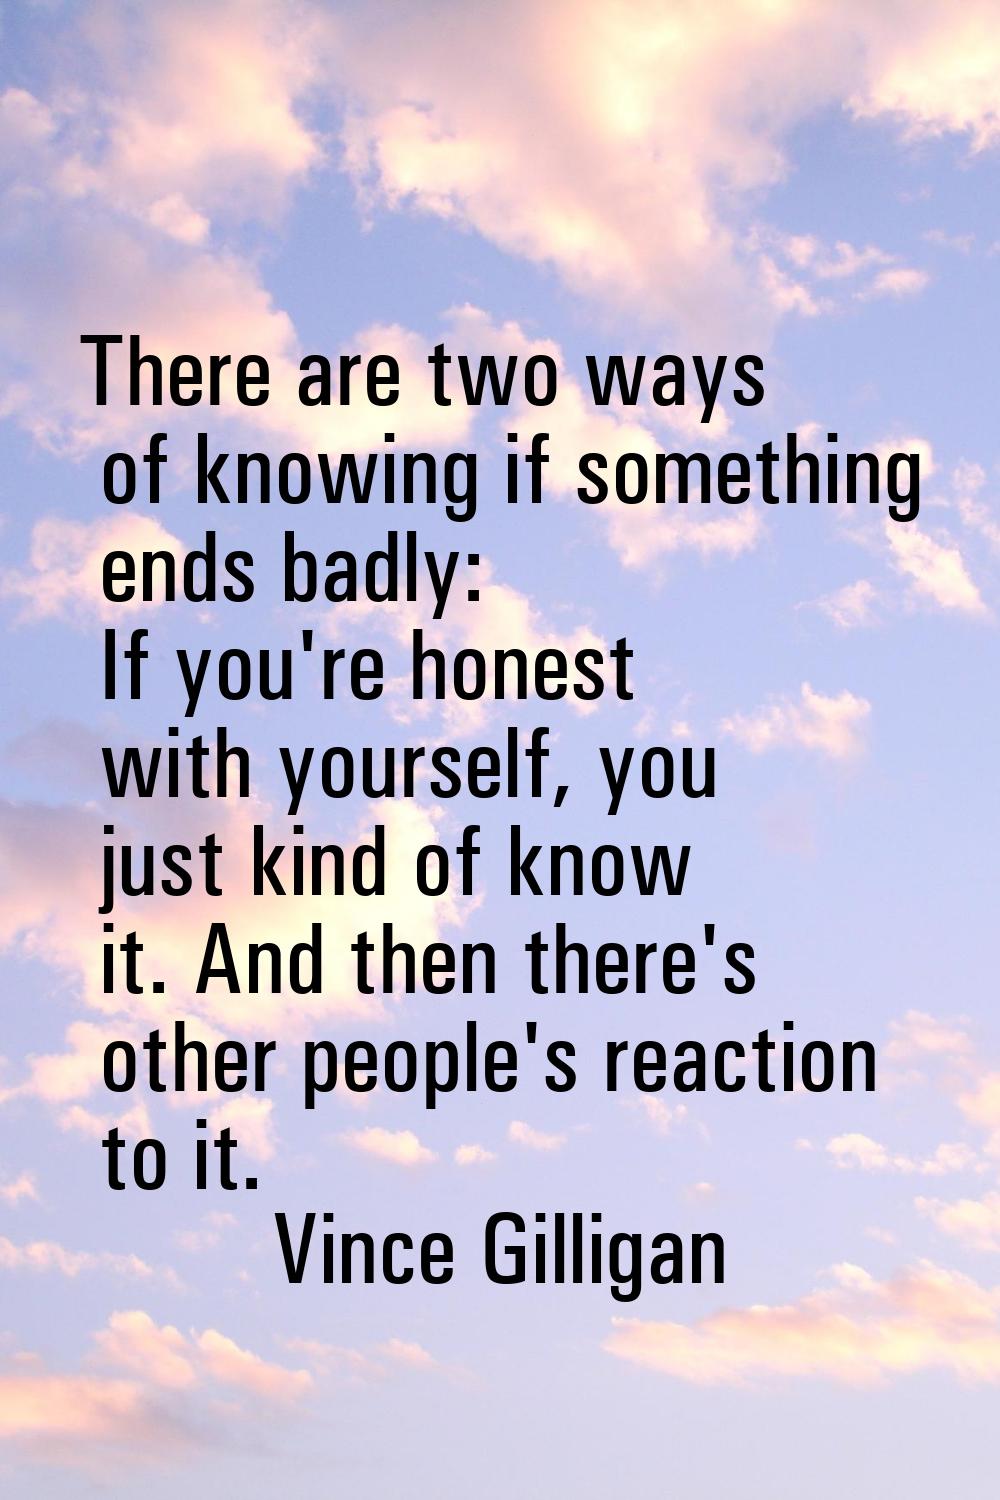 There are two ways of knowing if something ends badly: If you're honest with yourself, you just kin